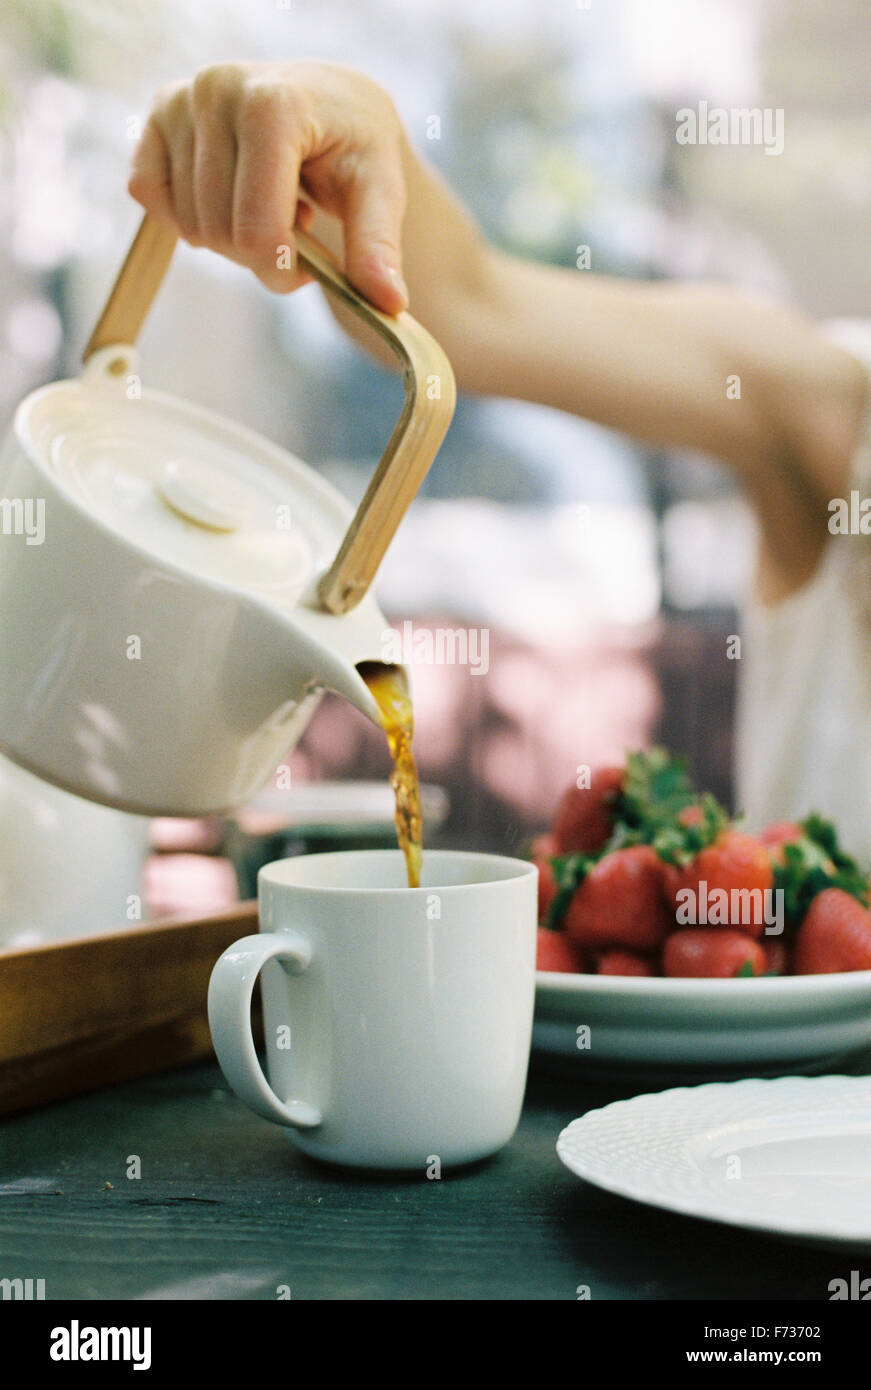 Woman pouring a cup of tea. Stock Photo